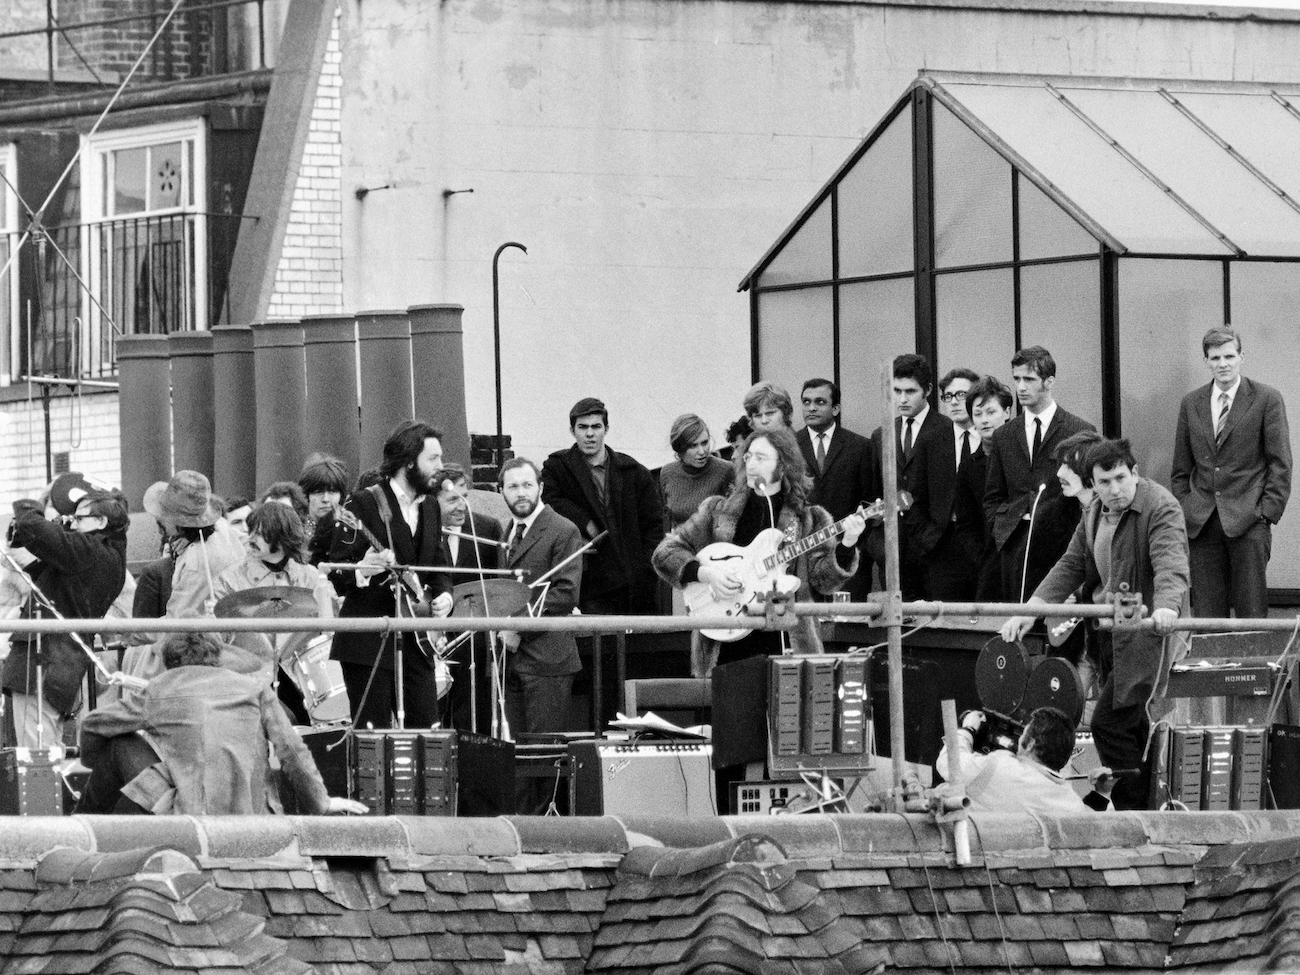 The Beatles performing on the rooftop of Apple Headquarters in 1969.